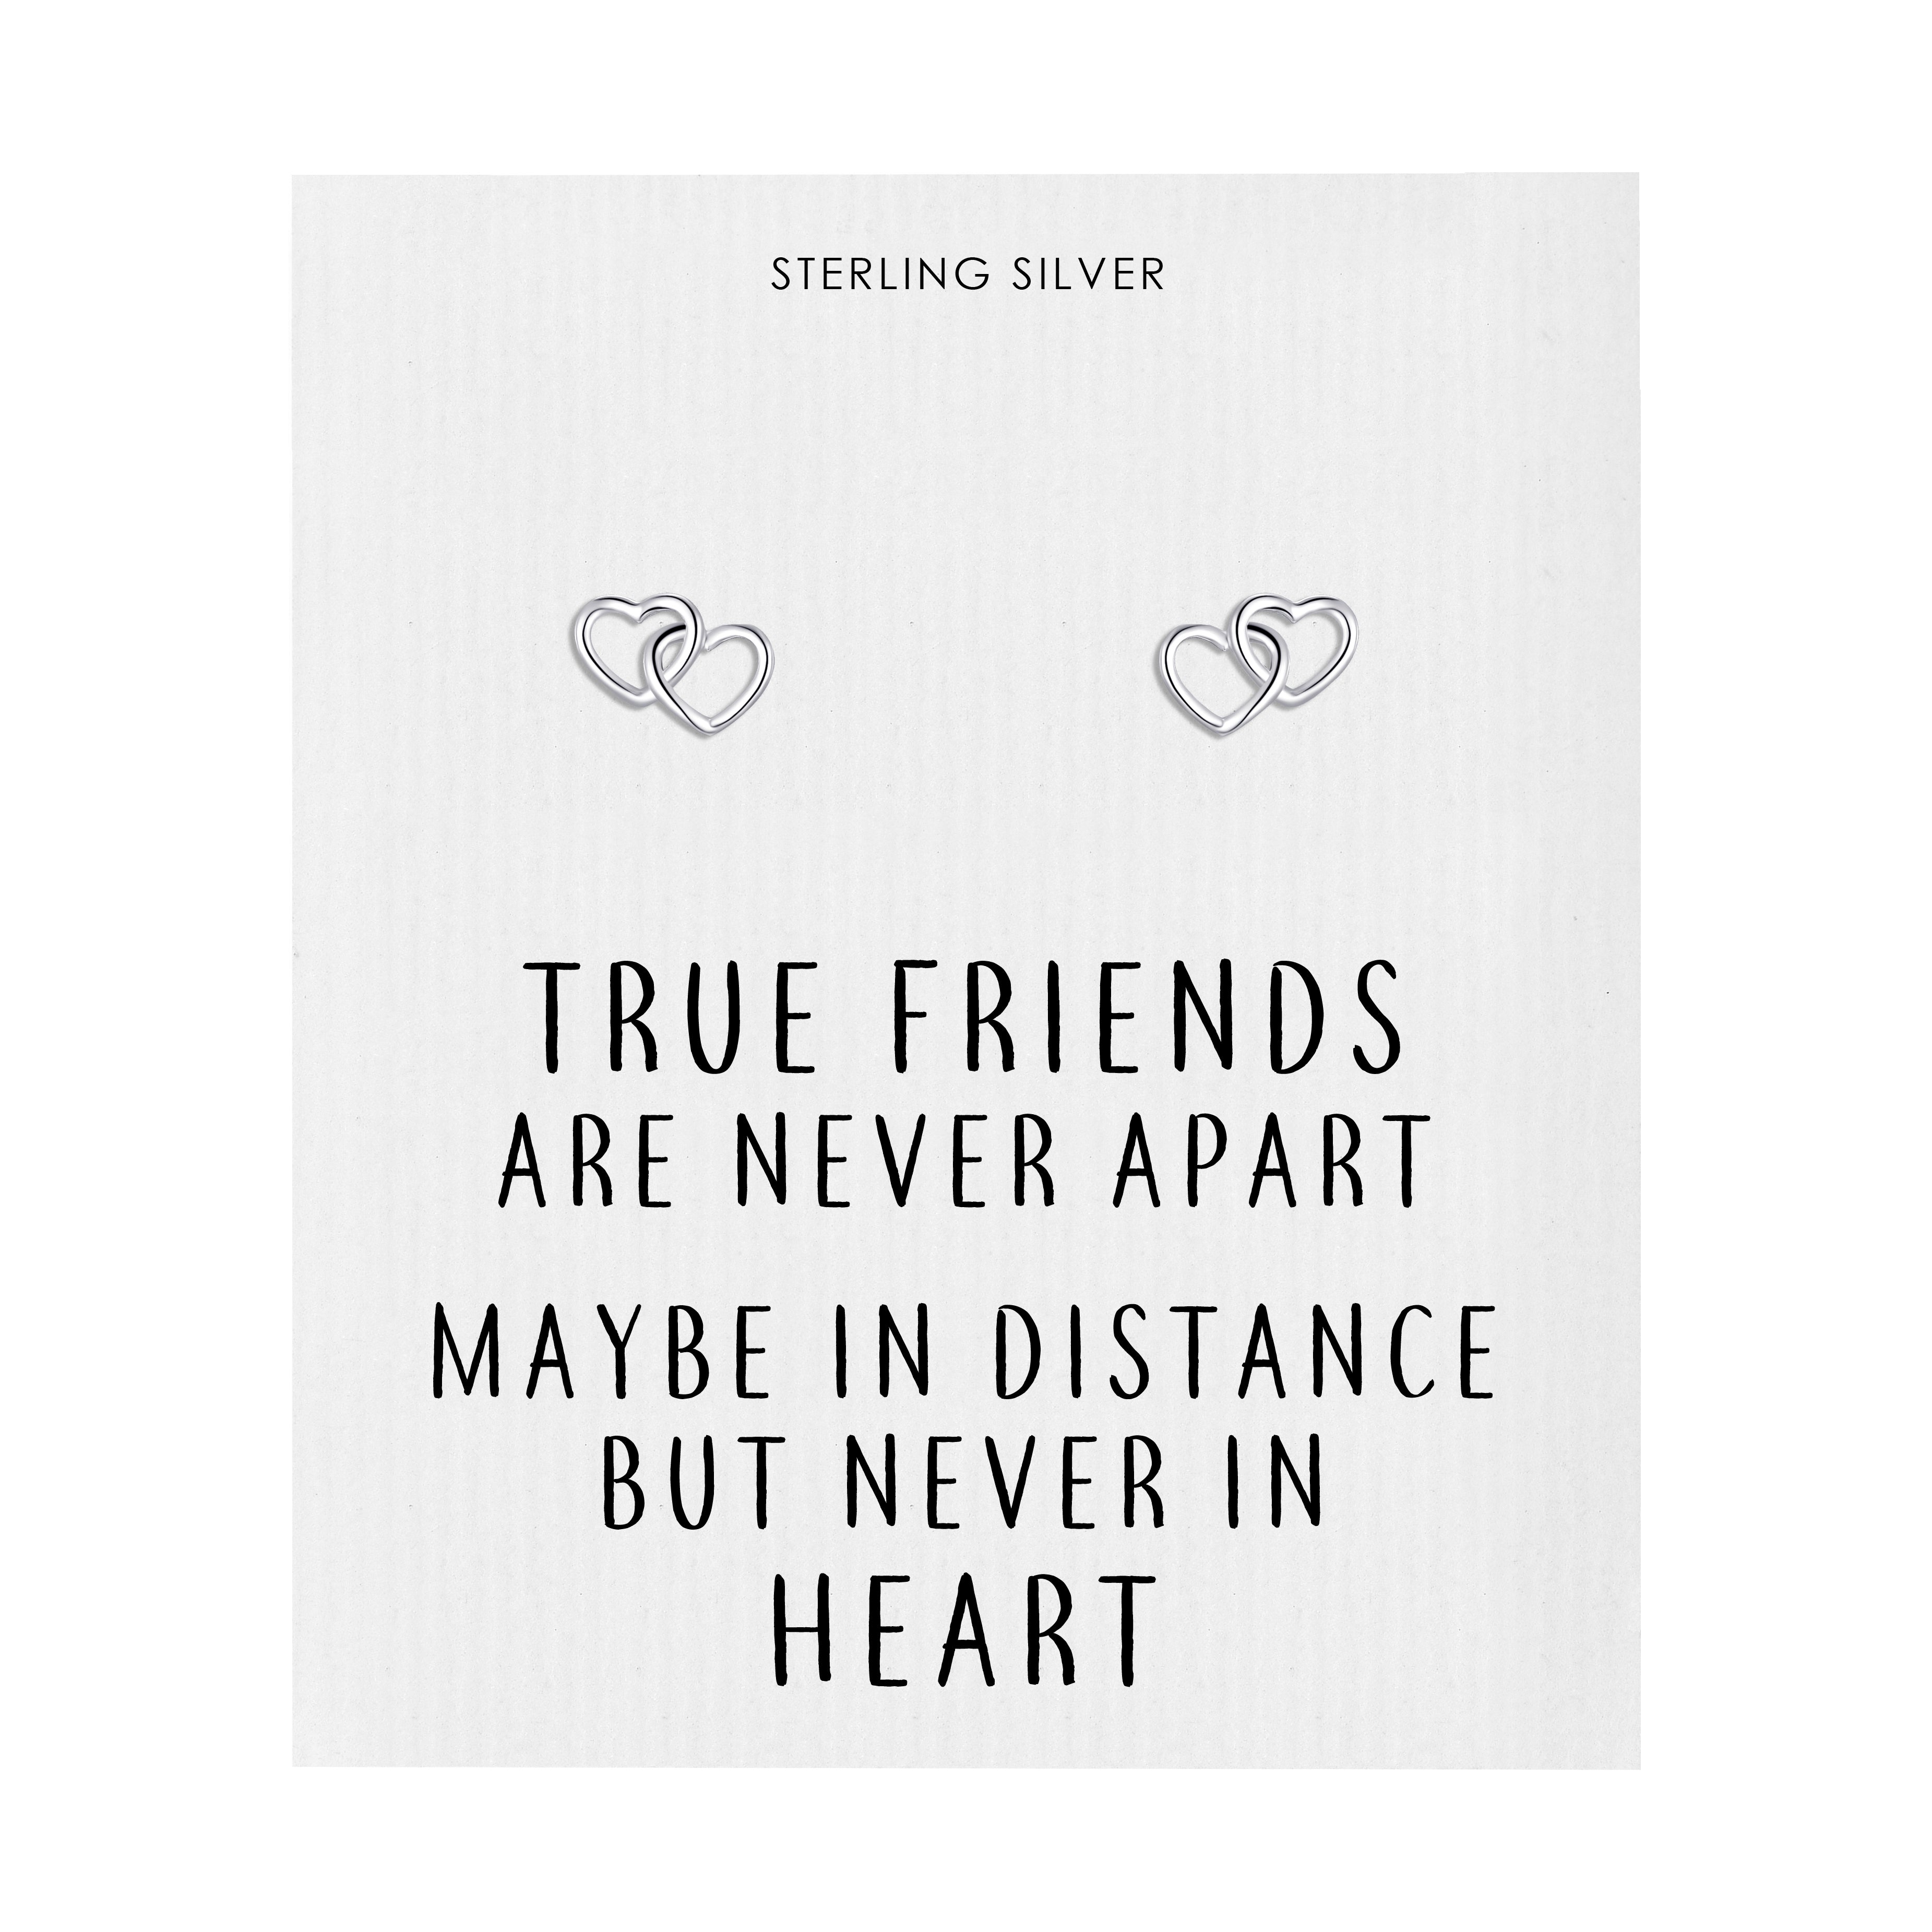 Sterling Silver True Friends Heart Link Earrings with Quote Card